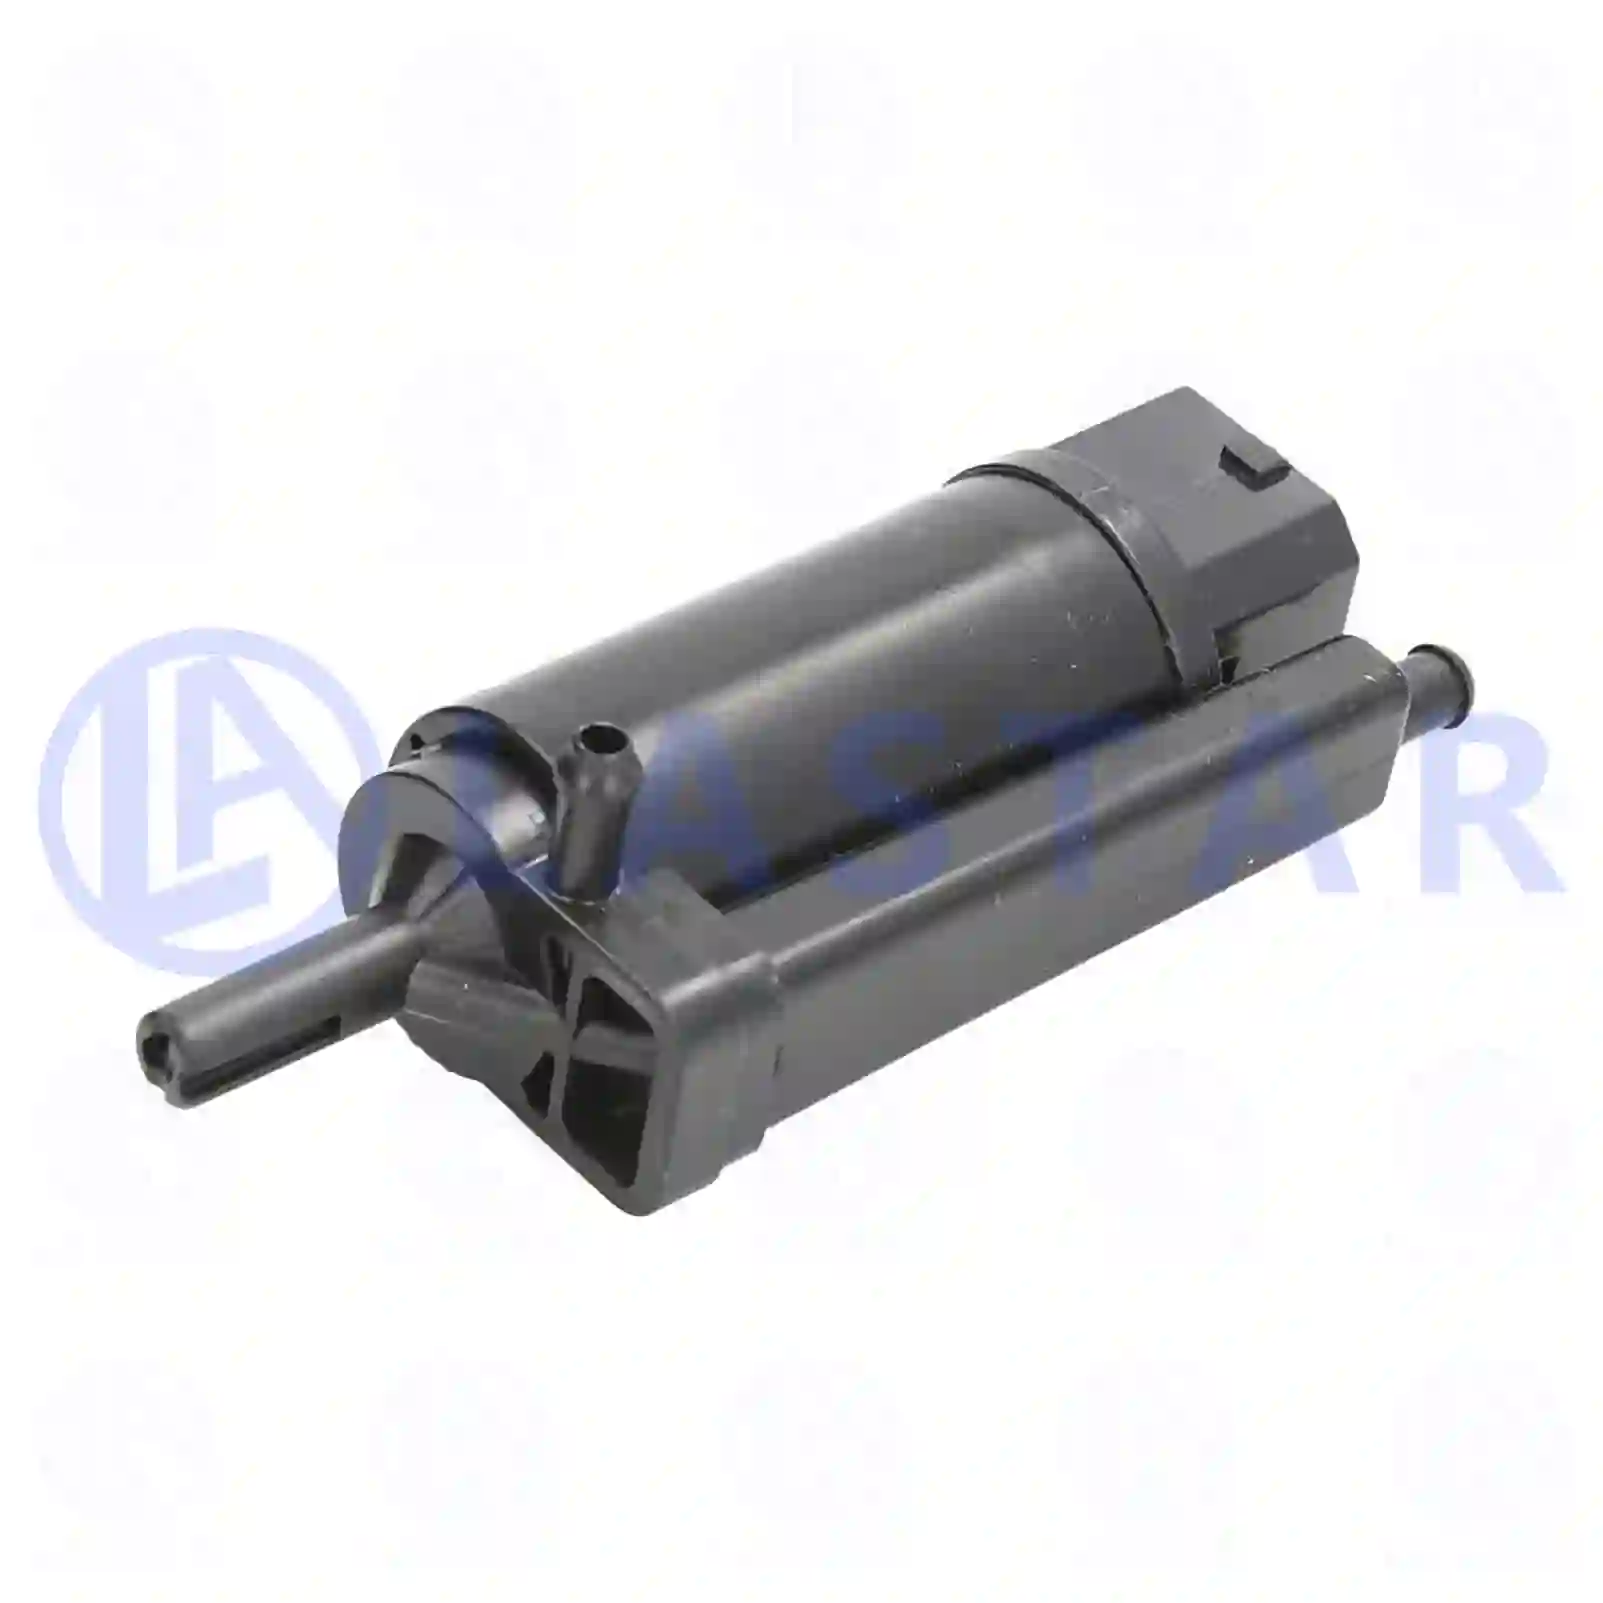 Washer pump, with water level sensor, 77718101, 20409793, 20747536, 21189159, 3980681, 8189170, ZG21284-0008 ||  77718101 Lastar Spare Part | Truck Spare Parts, Auotomotive Spare Parts Washer pump, with water level sensor, 77718101, 20409793, 20747536, 21189159, 3980681, 8189170, ZG21284-0008 ||  77718101 Lastar Spare Part | Truck Spare Parts, Auotomotive Spare Parts